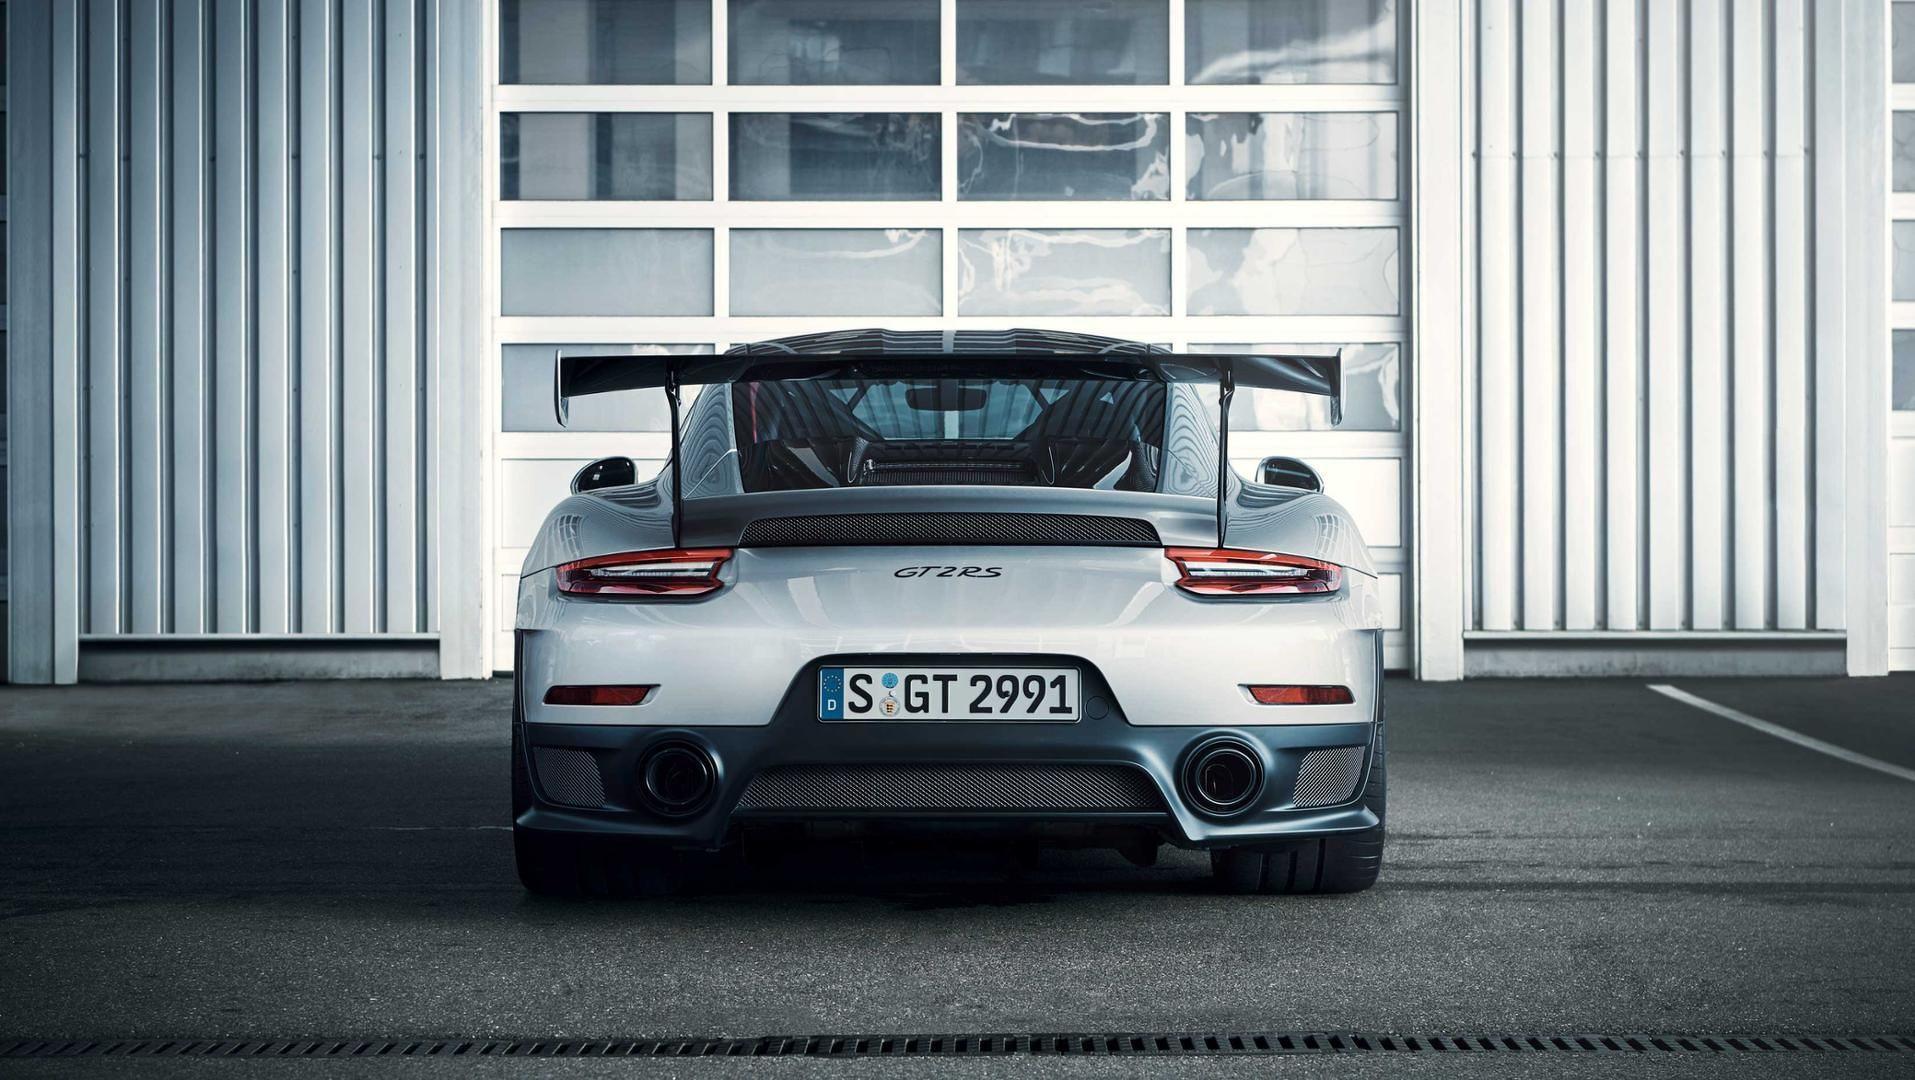 Check Out The Porsche 911 GT2 RS In Leaked Official Image